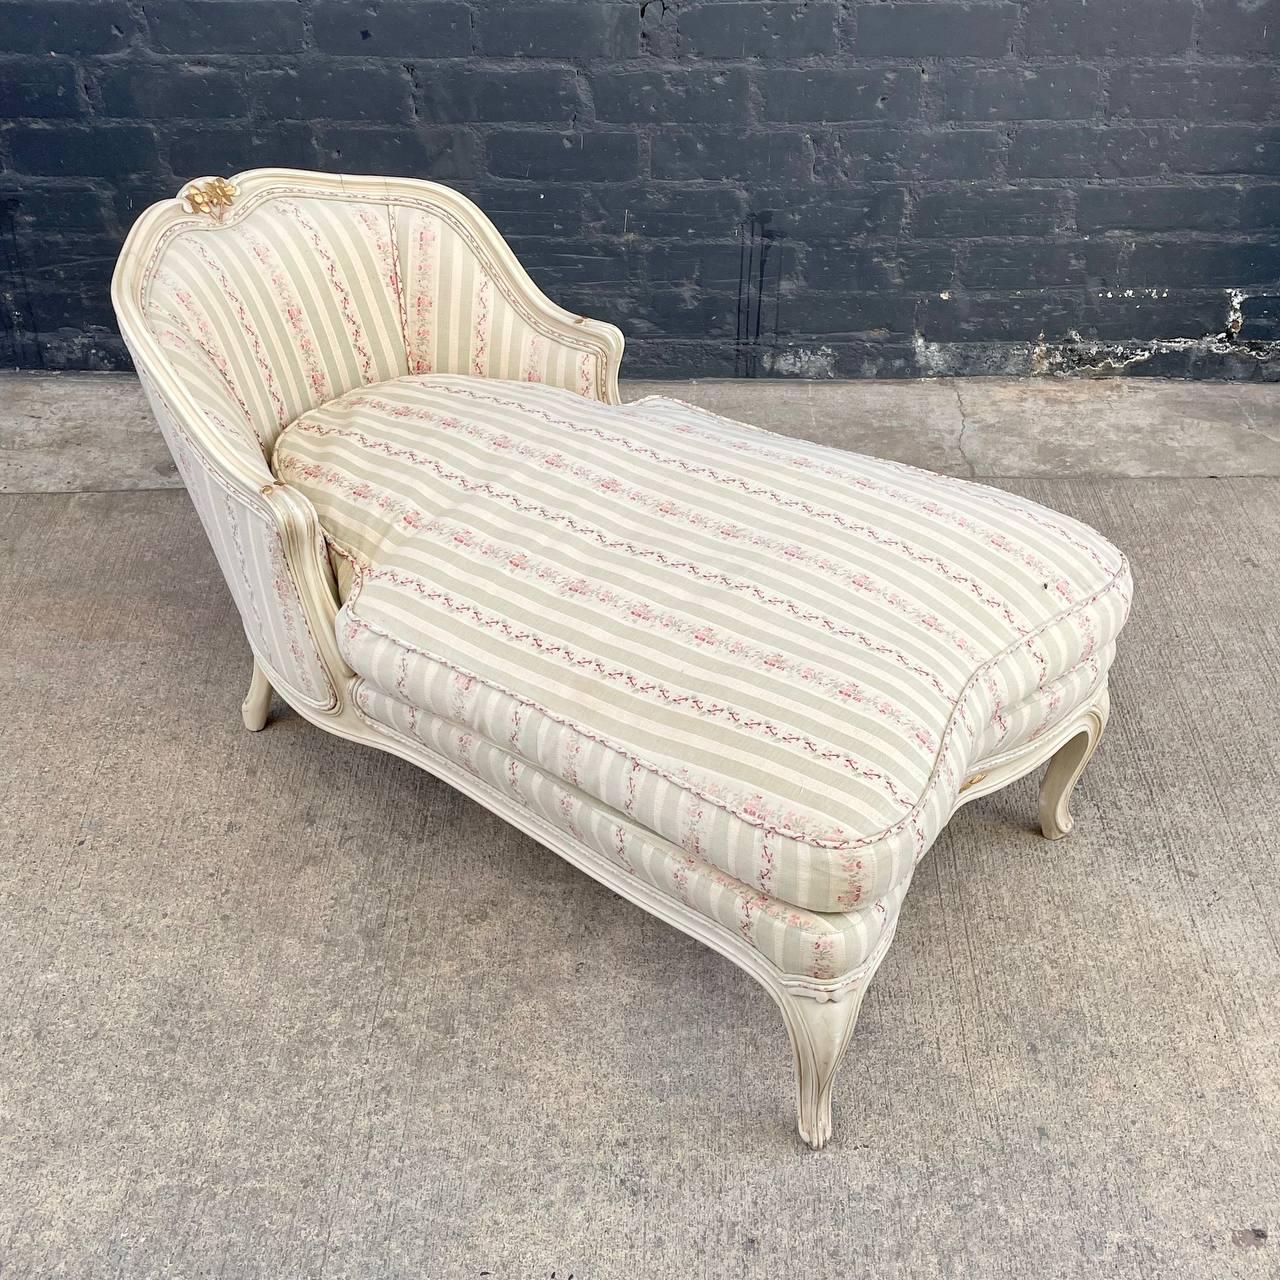 Vintage French Provincial Style Chaise Lounge Chair

Original Vintage Condition
Materials: Painted Wood, Gold Leaf, Original Upholstery
Dimensions: 
26”H x 47”W x 25.50”D
Seat Height 17”